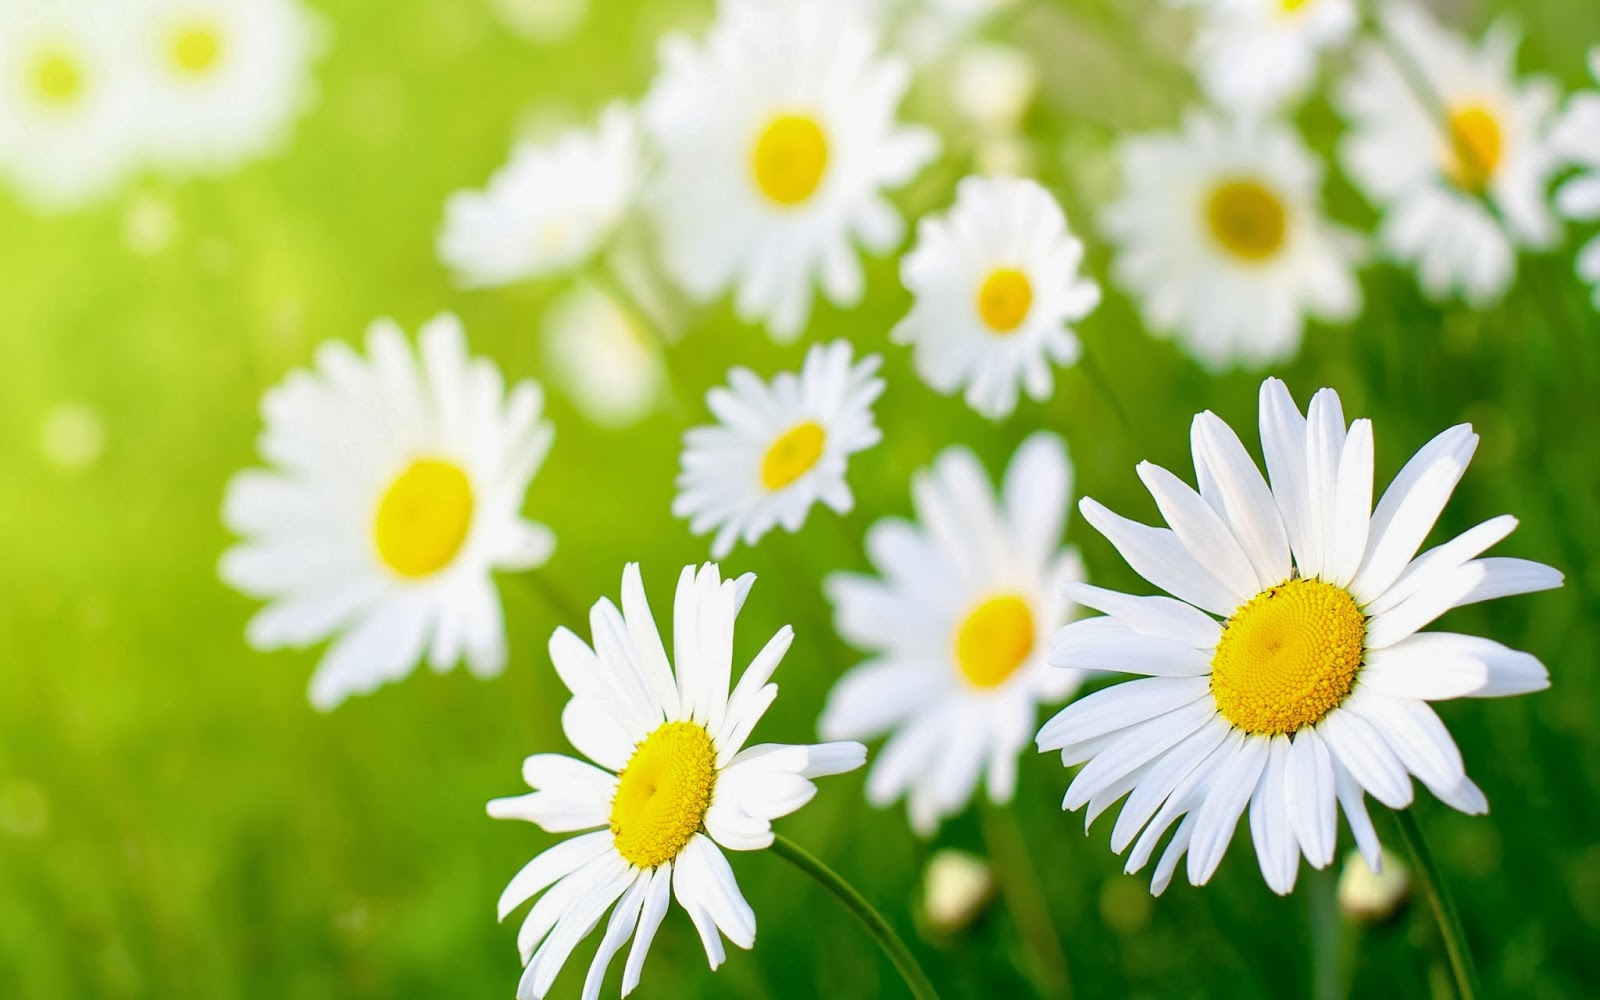 Wallpaper And Make This Daisy Flower For Your Desktop